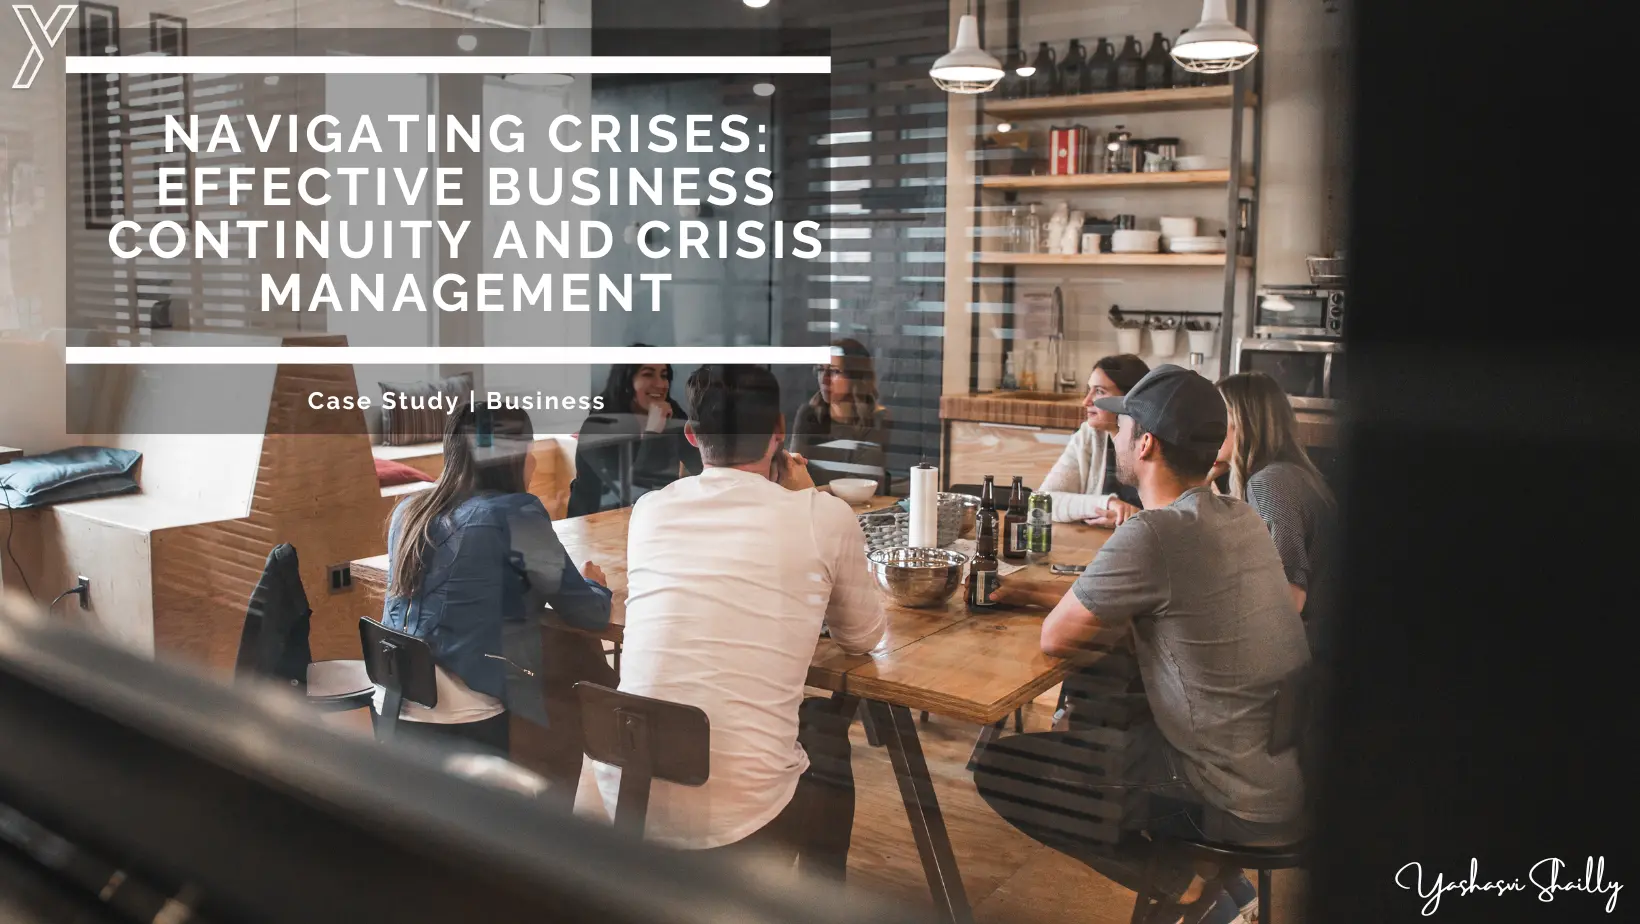 Navigating Crises: Effective Business Continuity and Crisis Management